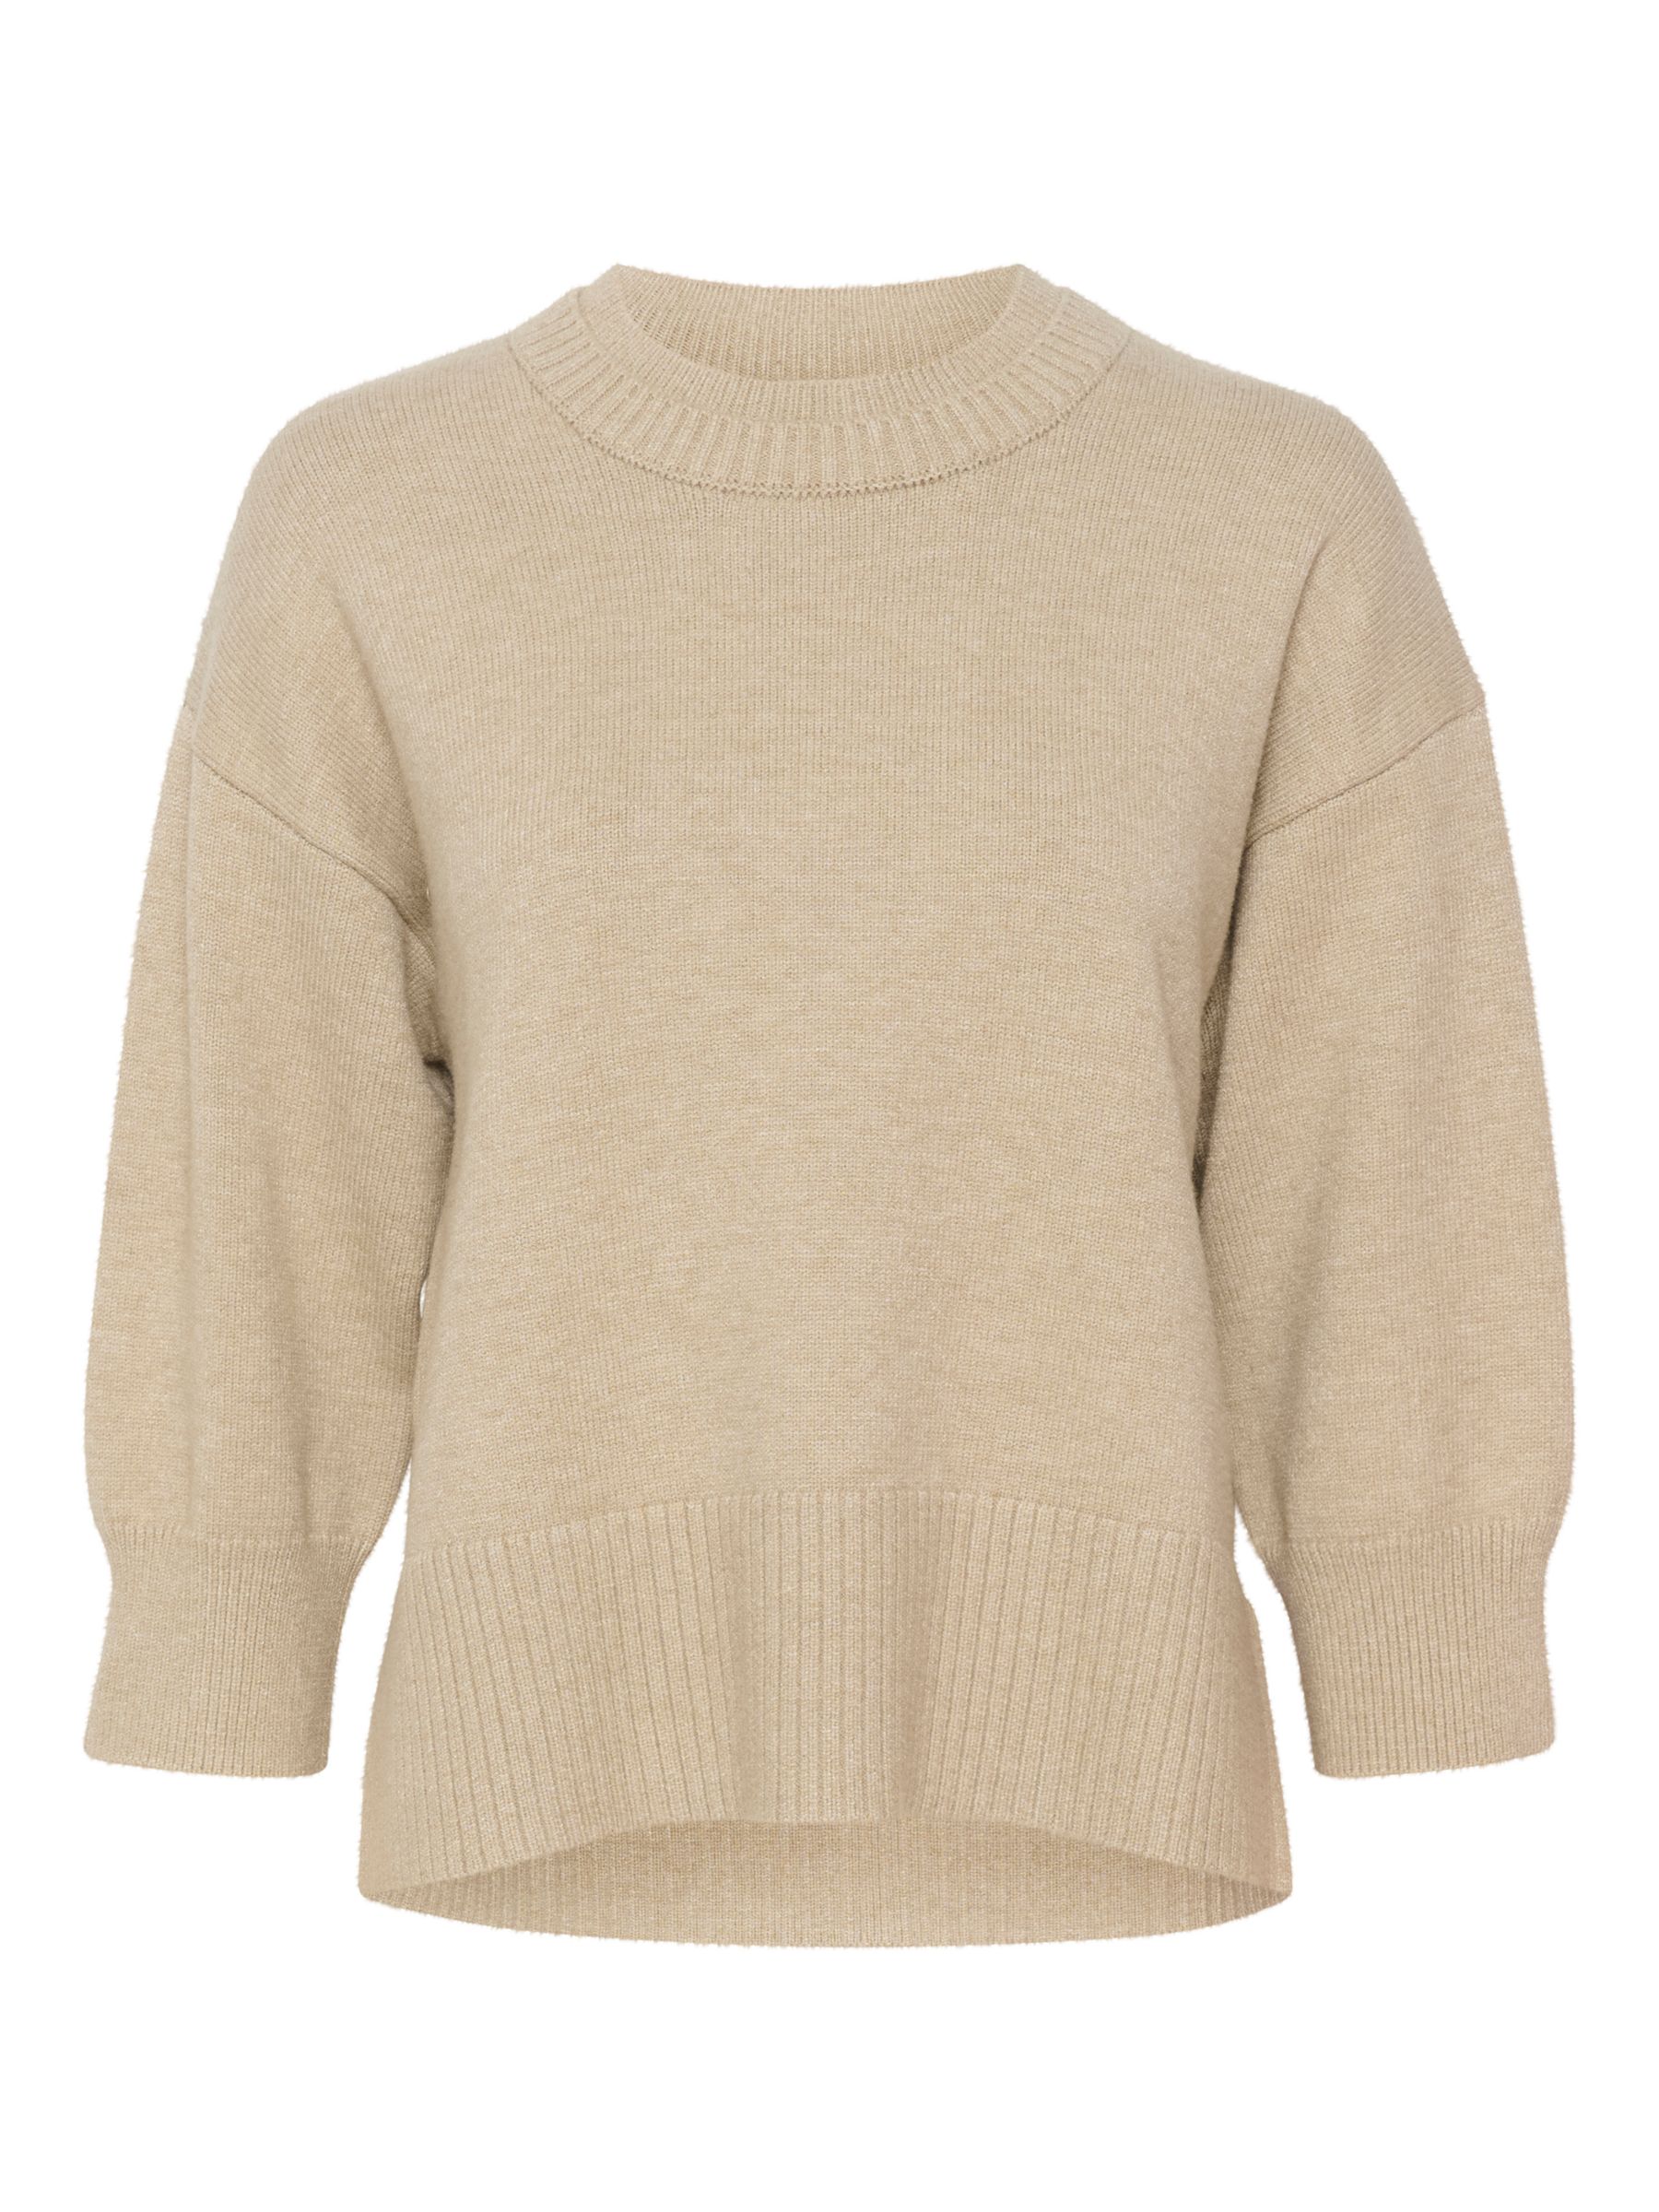 Buy KAFFE Markle Casual Fit Jumper, Feather Gray Online at johnlewis.com